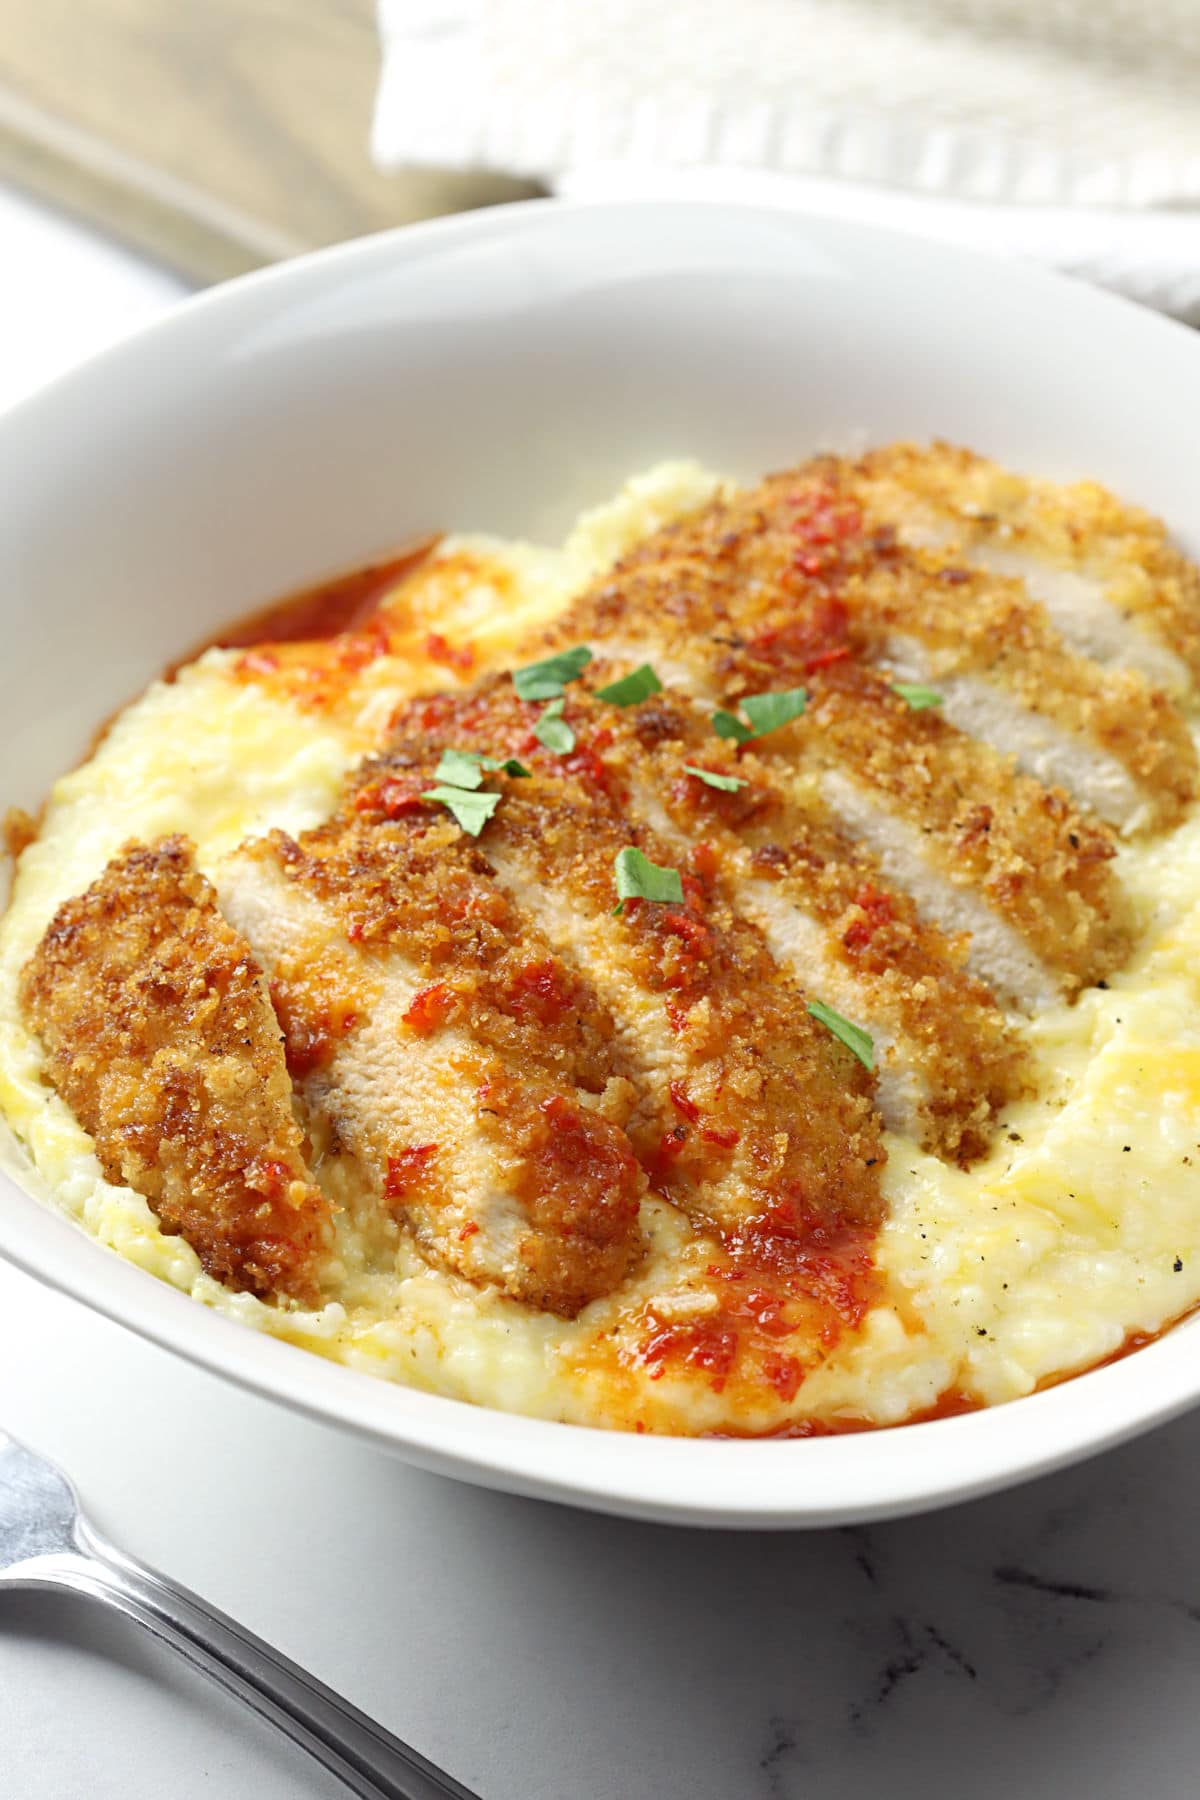 Sliced pan fried chicken on top of a bowl of cheesy grits.